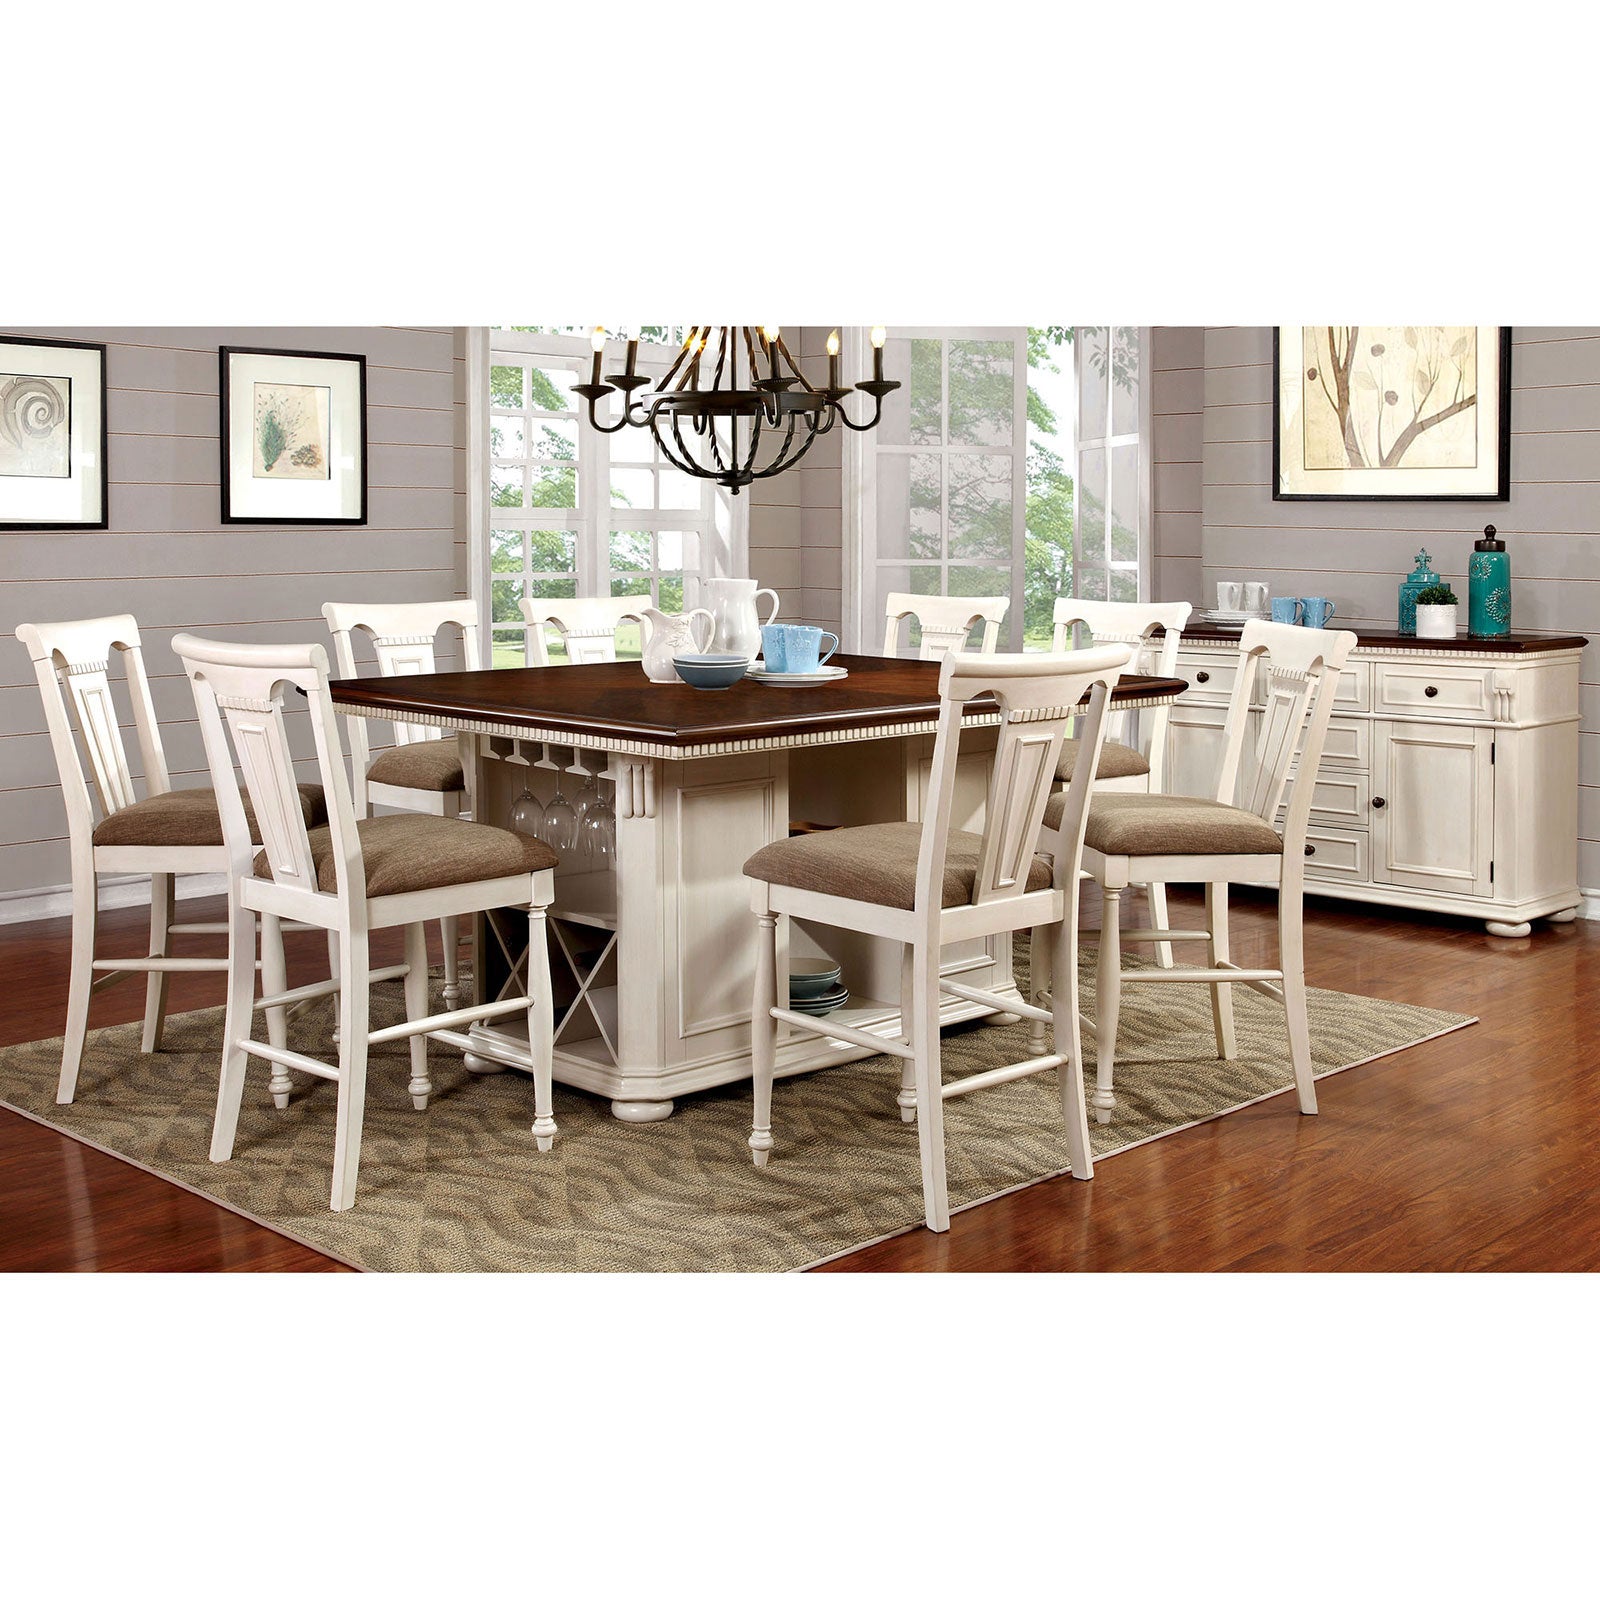 SABRINA Off White/Cherry 9 Pc. Counter Ht. Dining Table Set image